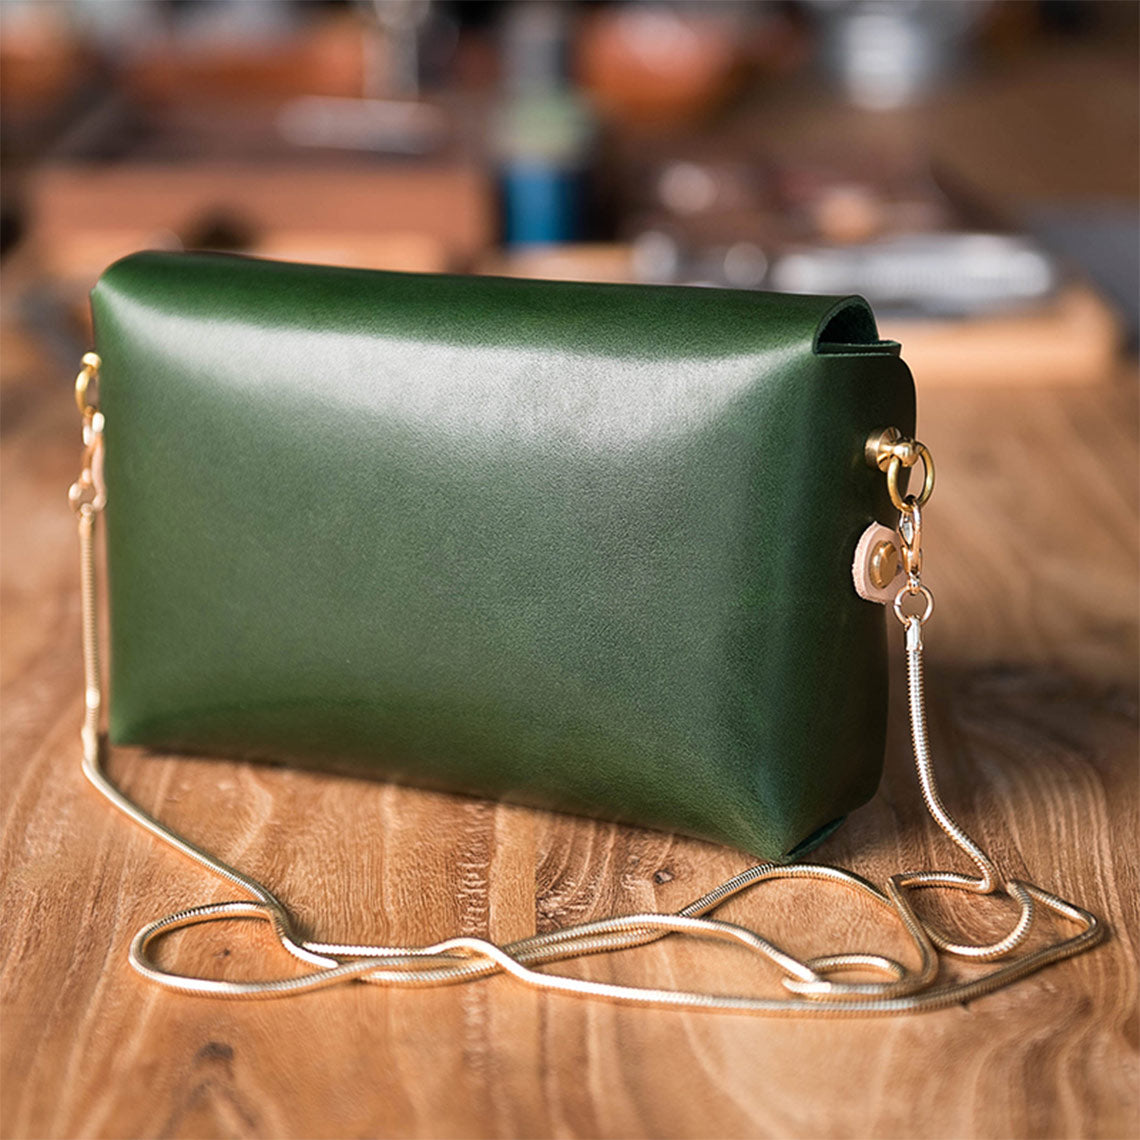 Square leather bag | Green leather crossbody bag | Handmade gift ideas